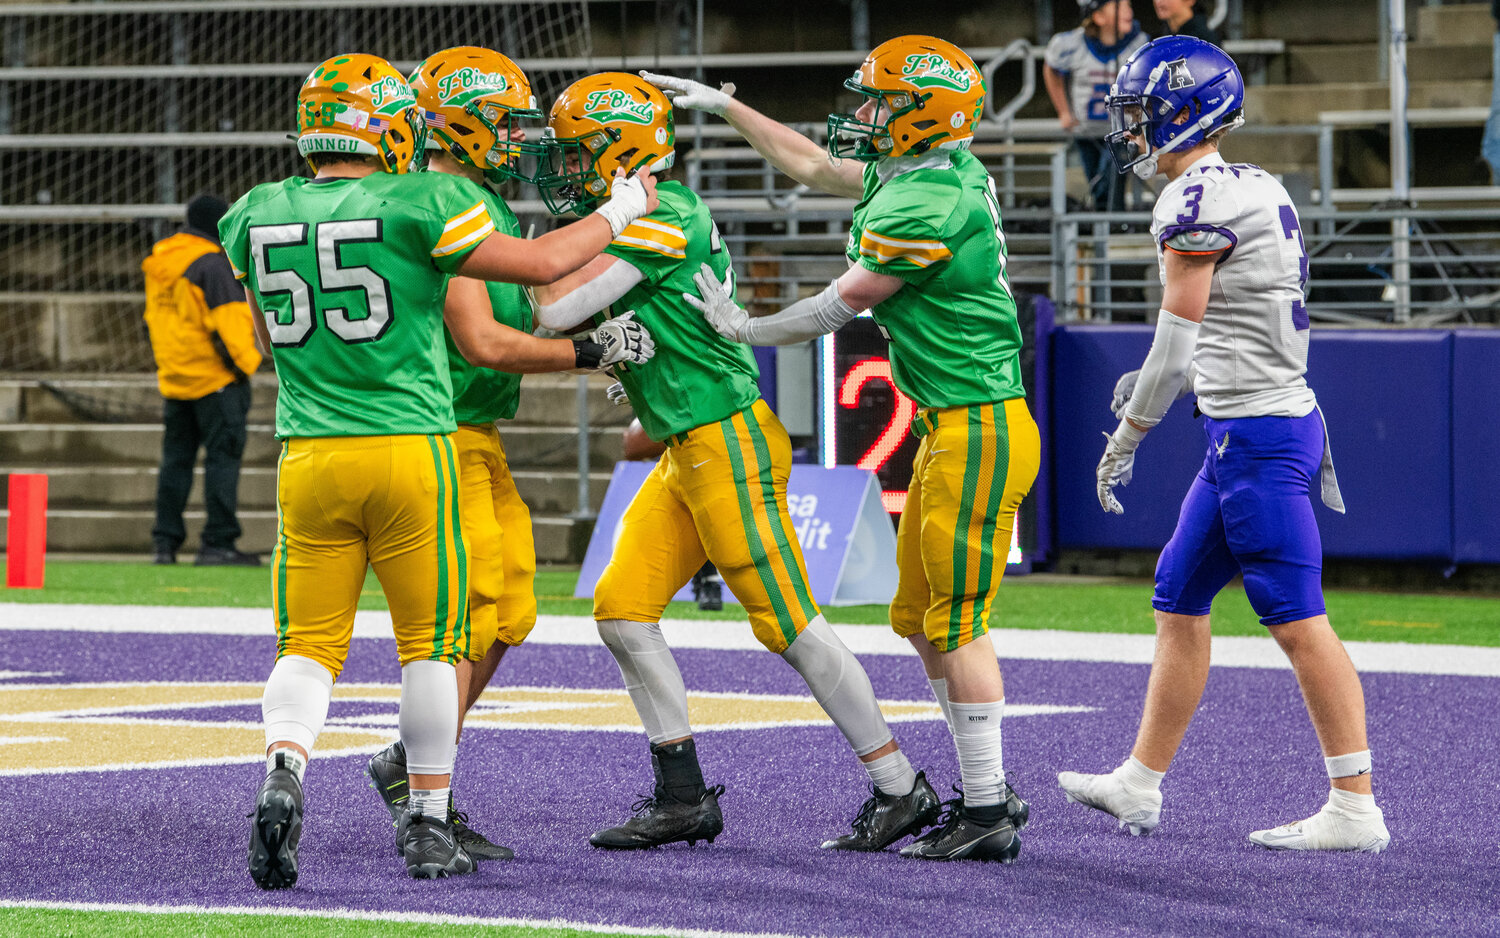 Tumwater Thunderbirds celebrate a touchdown during the 2A State Championship game at Husky Stadium in Seattle on Saturday.